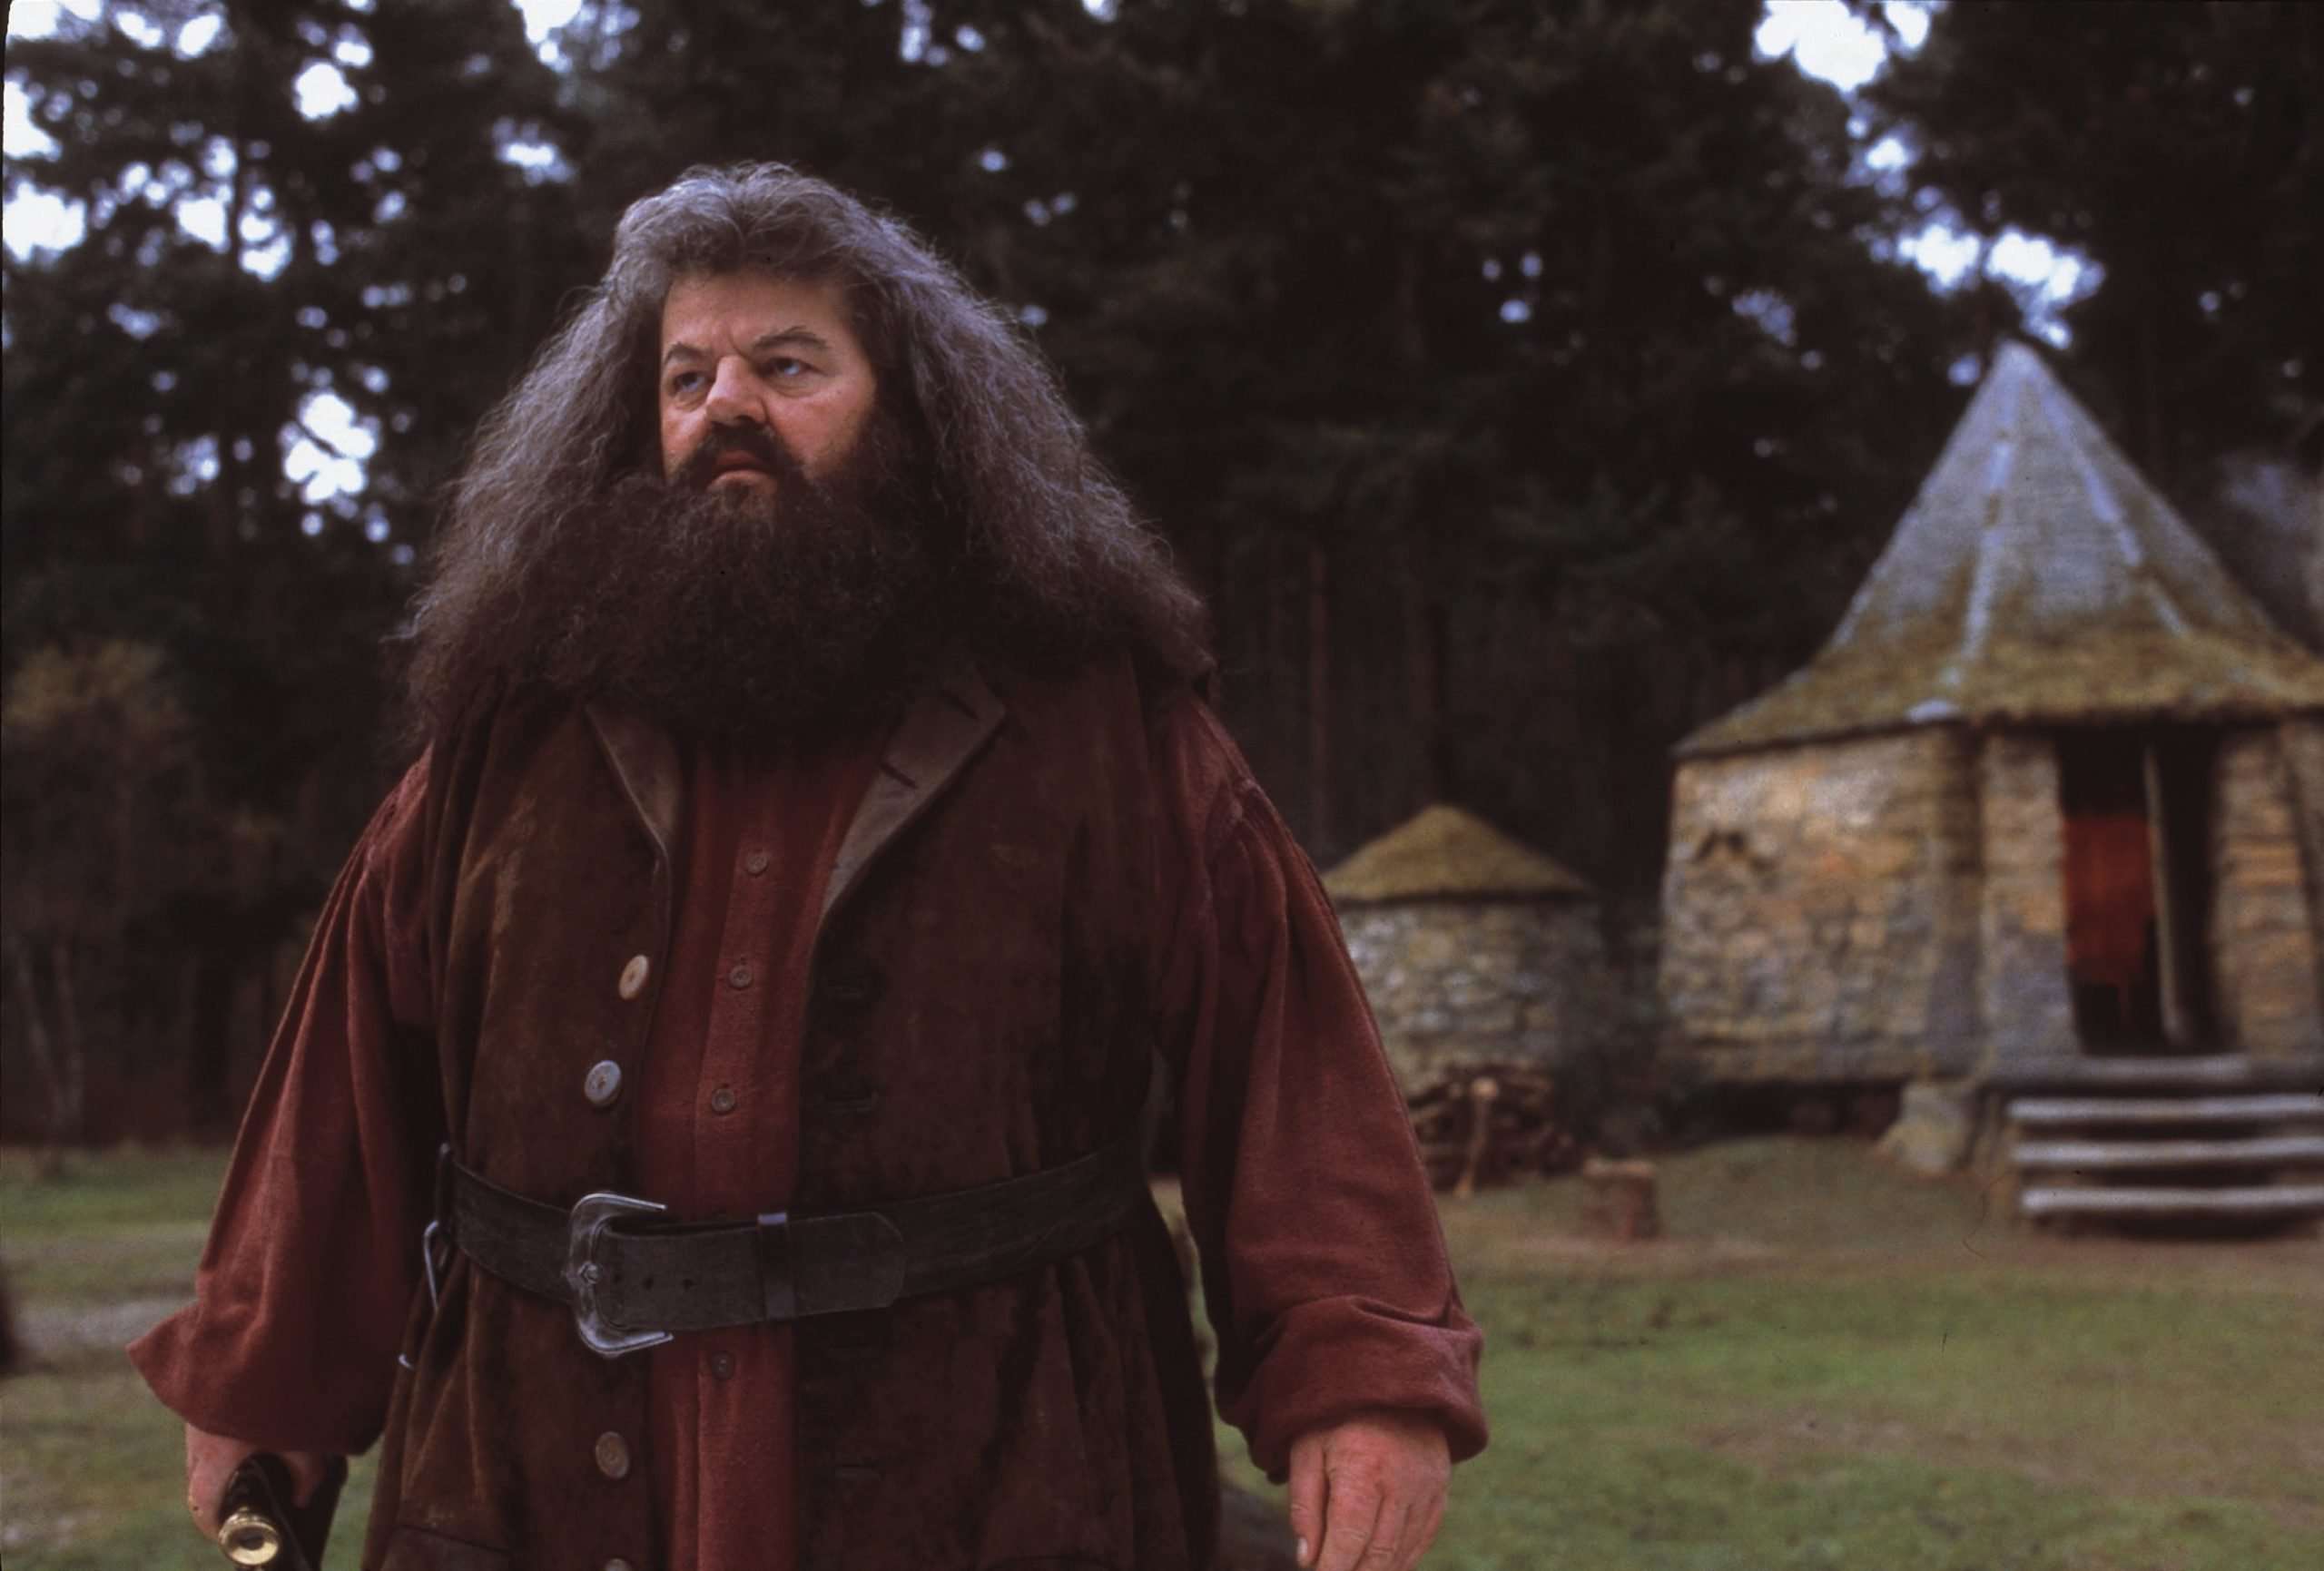 20 Larger Than Life Facts About Rubeus Hagrid